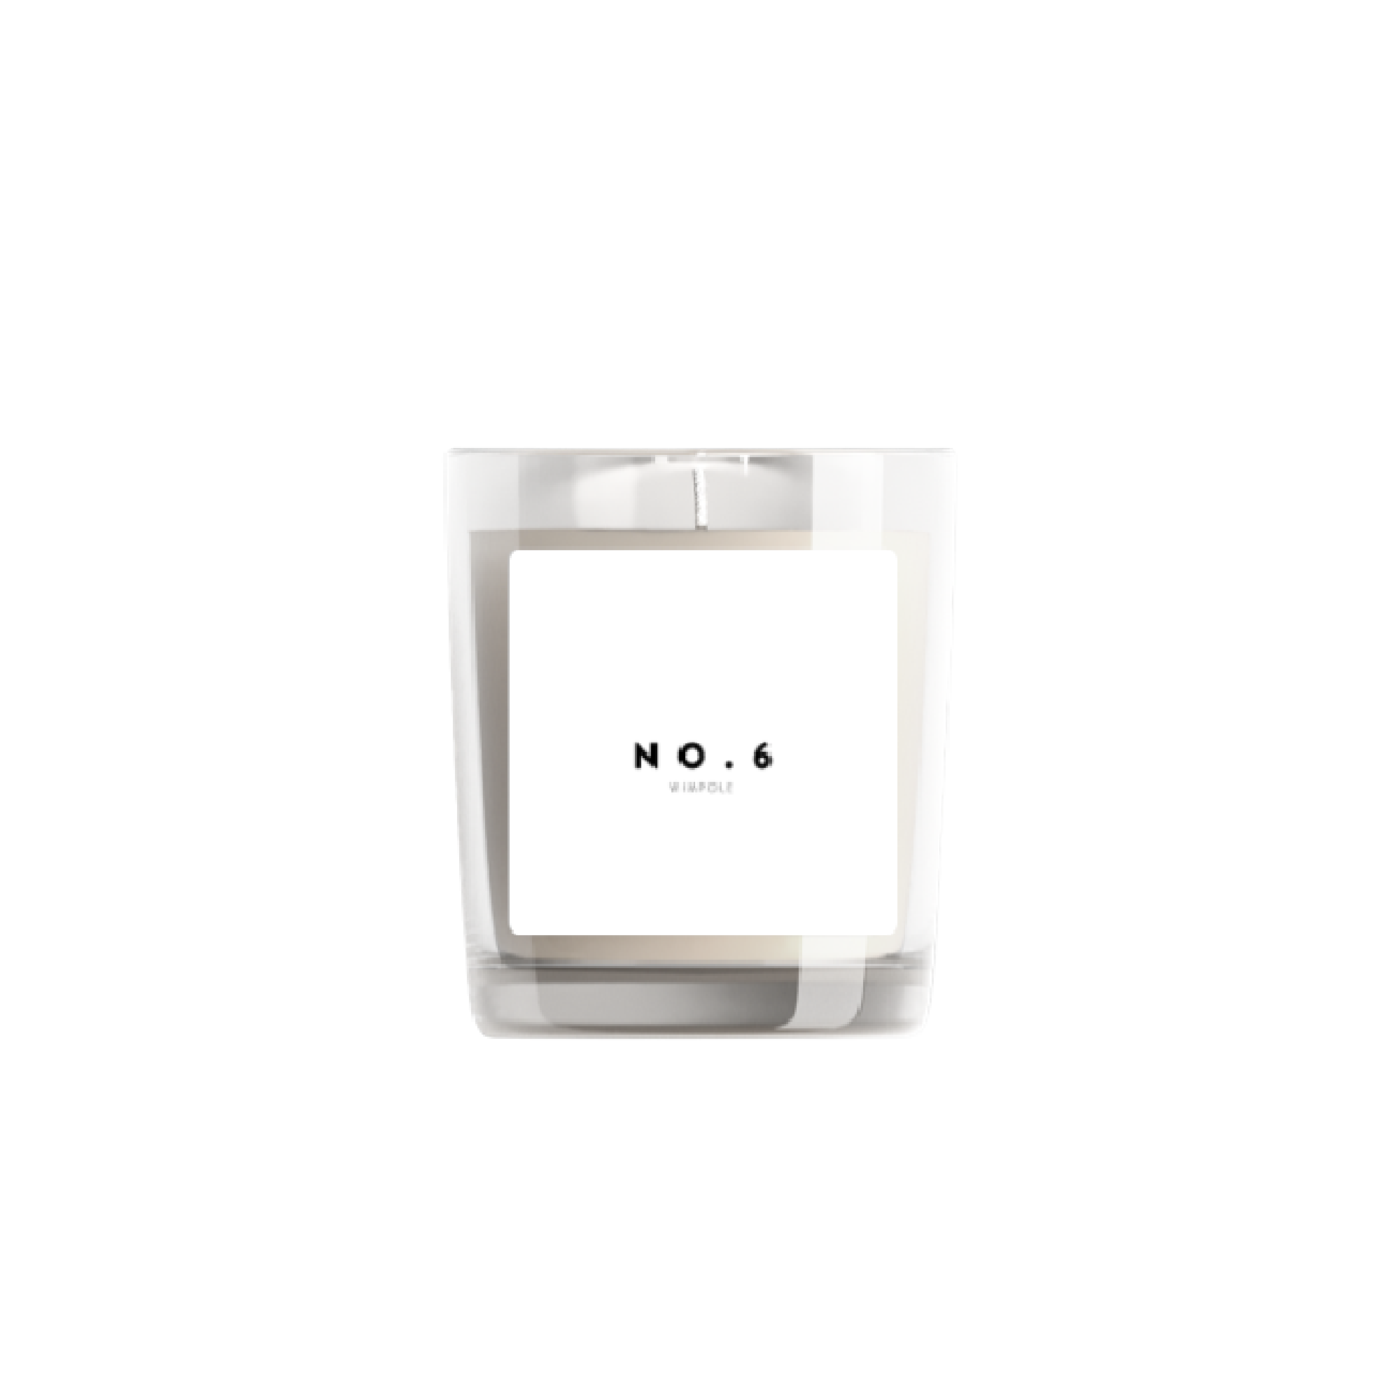 The Candle - No. 6 Scent